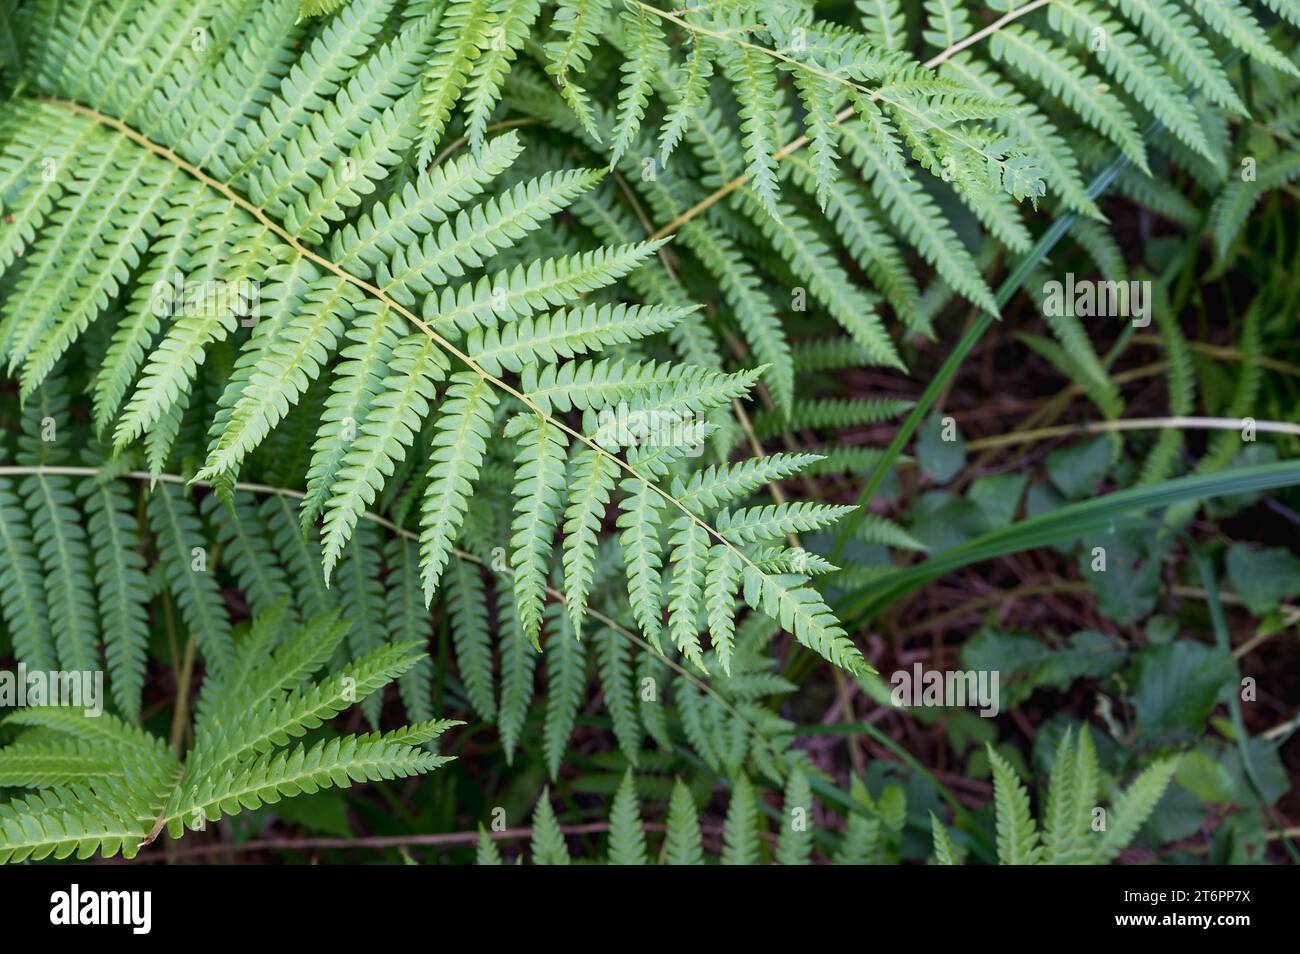 A close up of a Diamondleaf fern Lophosoria quadripinnata with lots of leaves Stock Photo